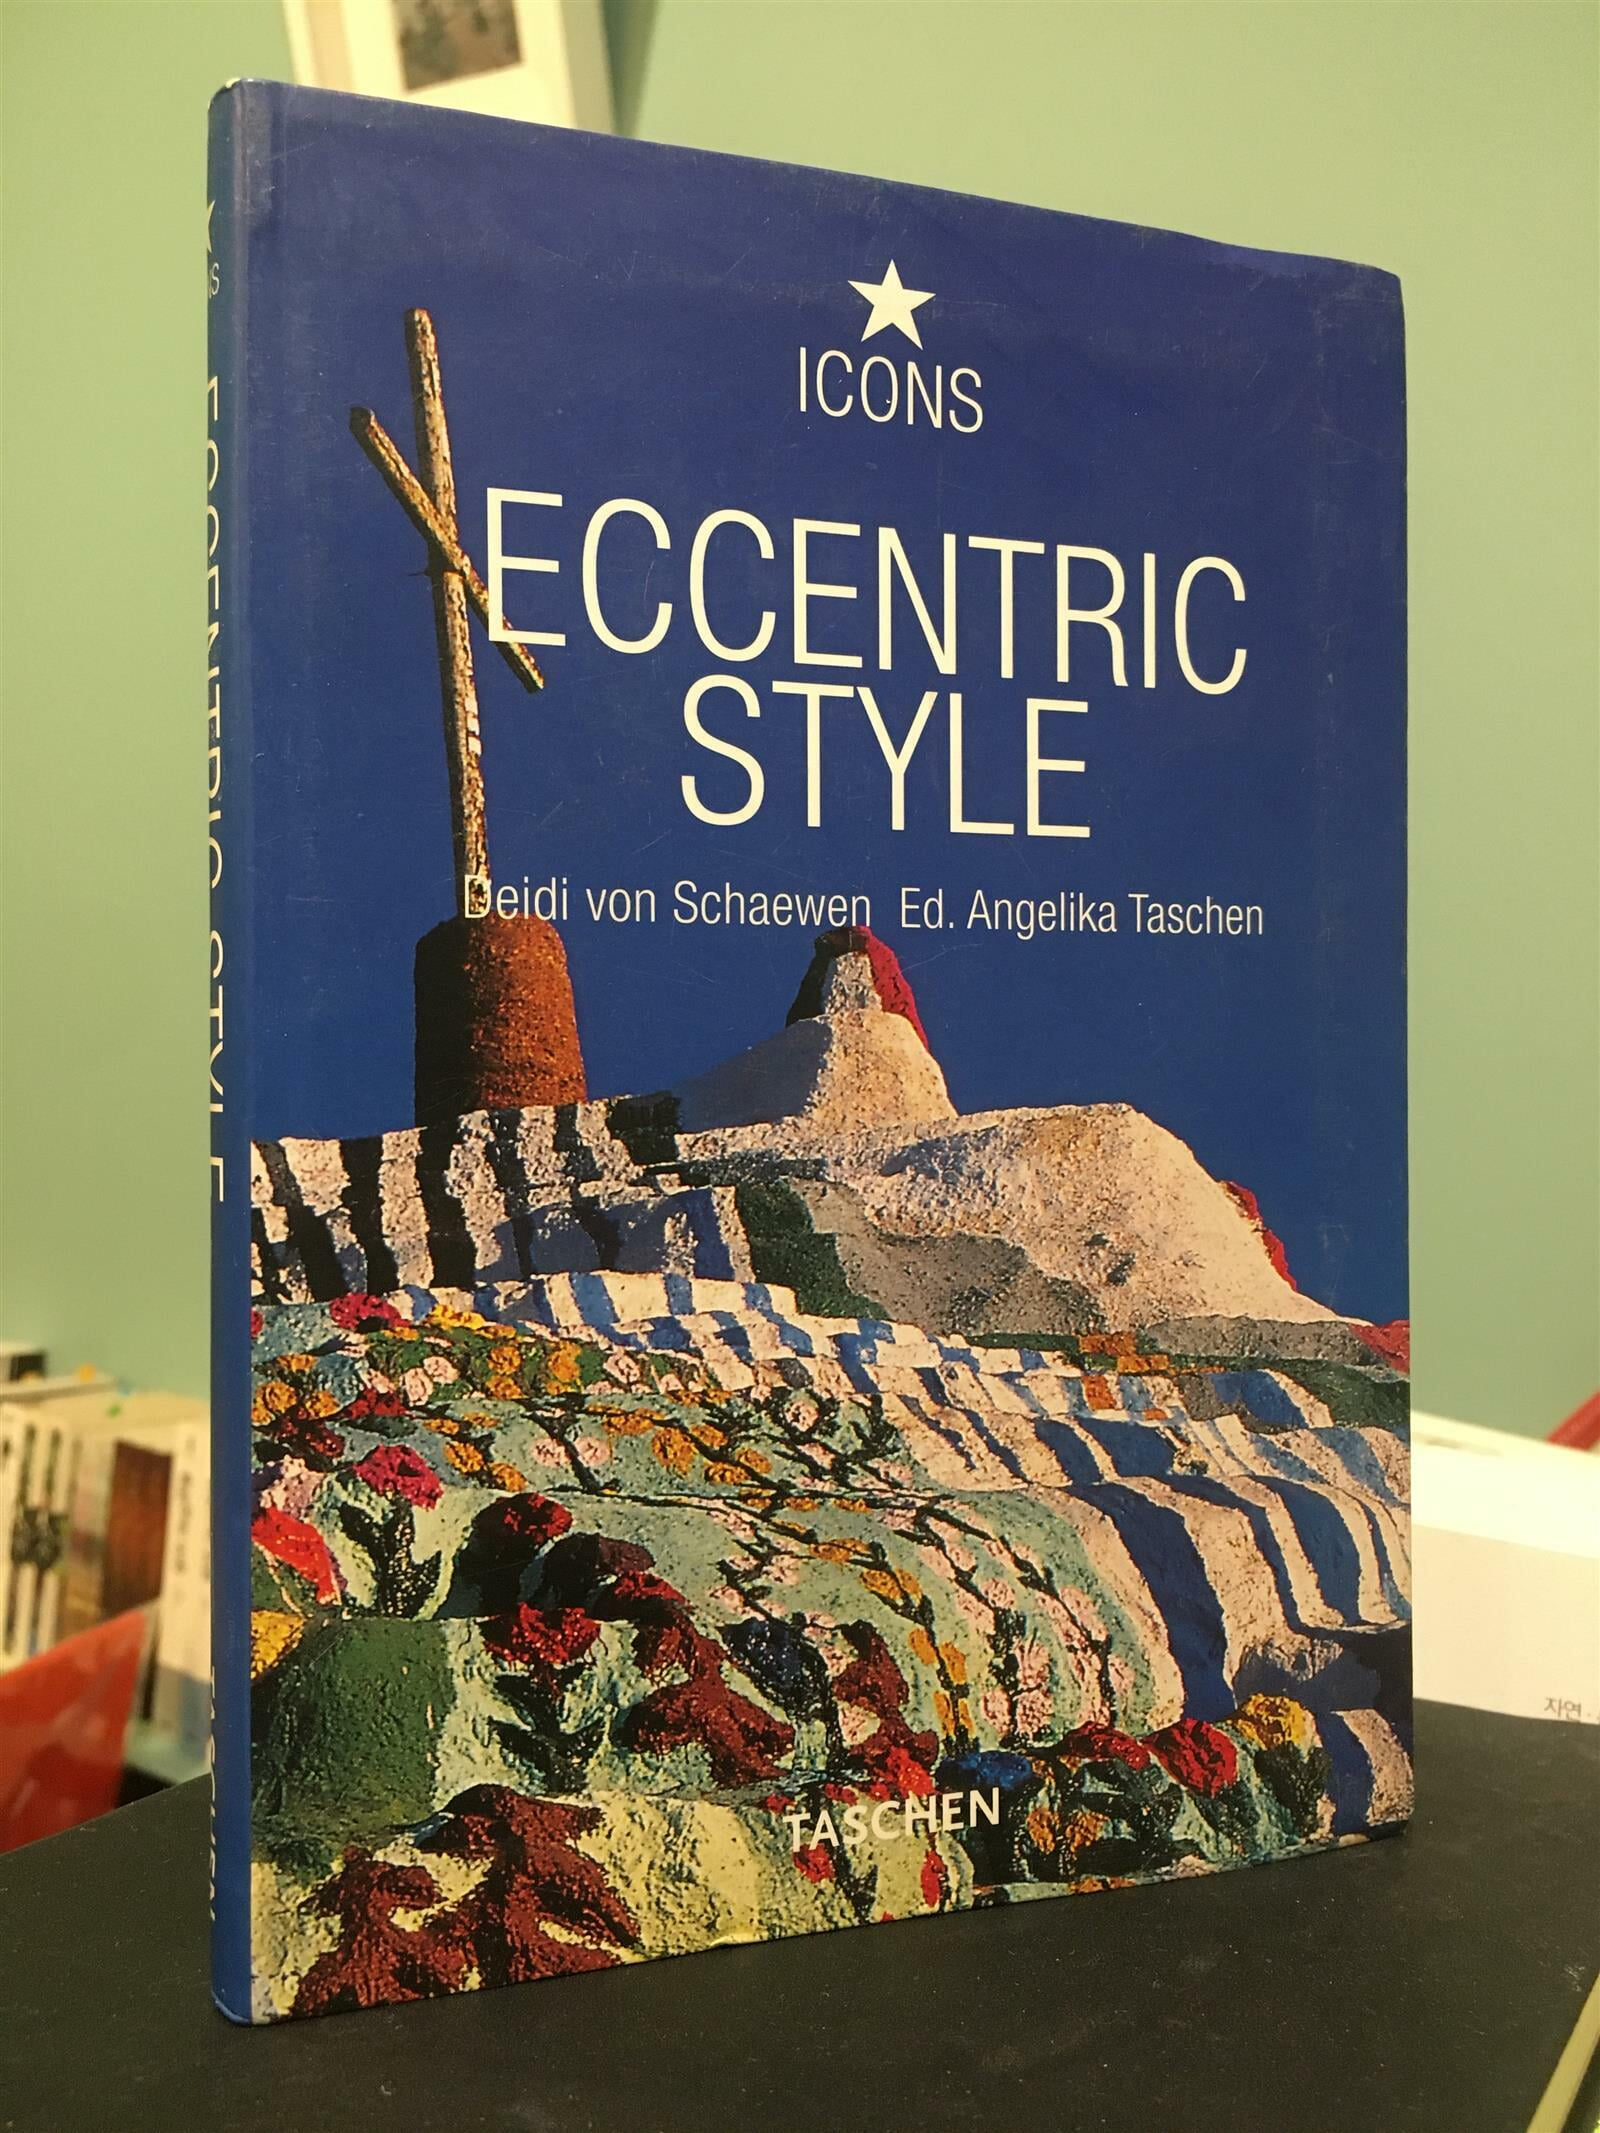 Eccentric Style (Icons Series)